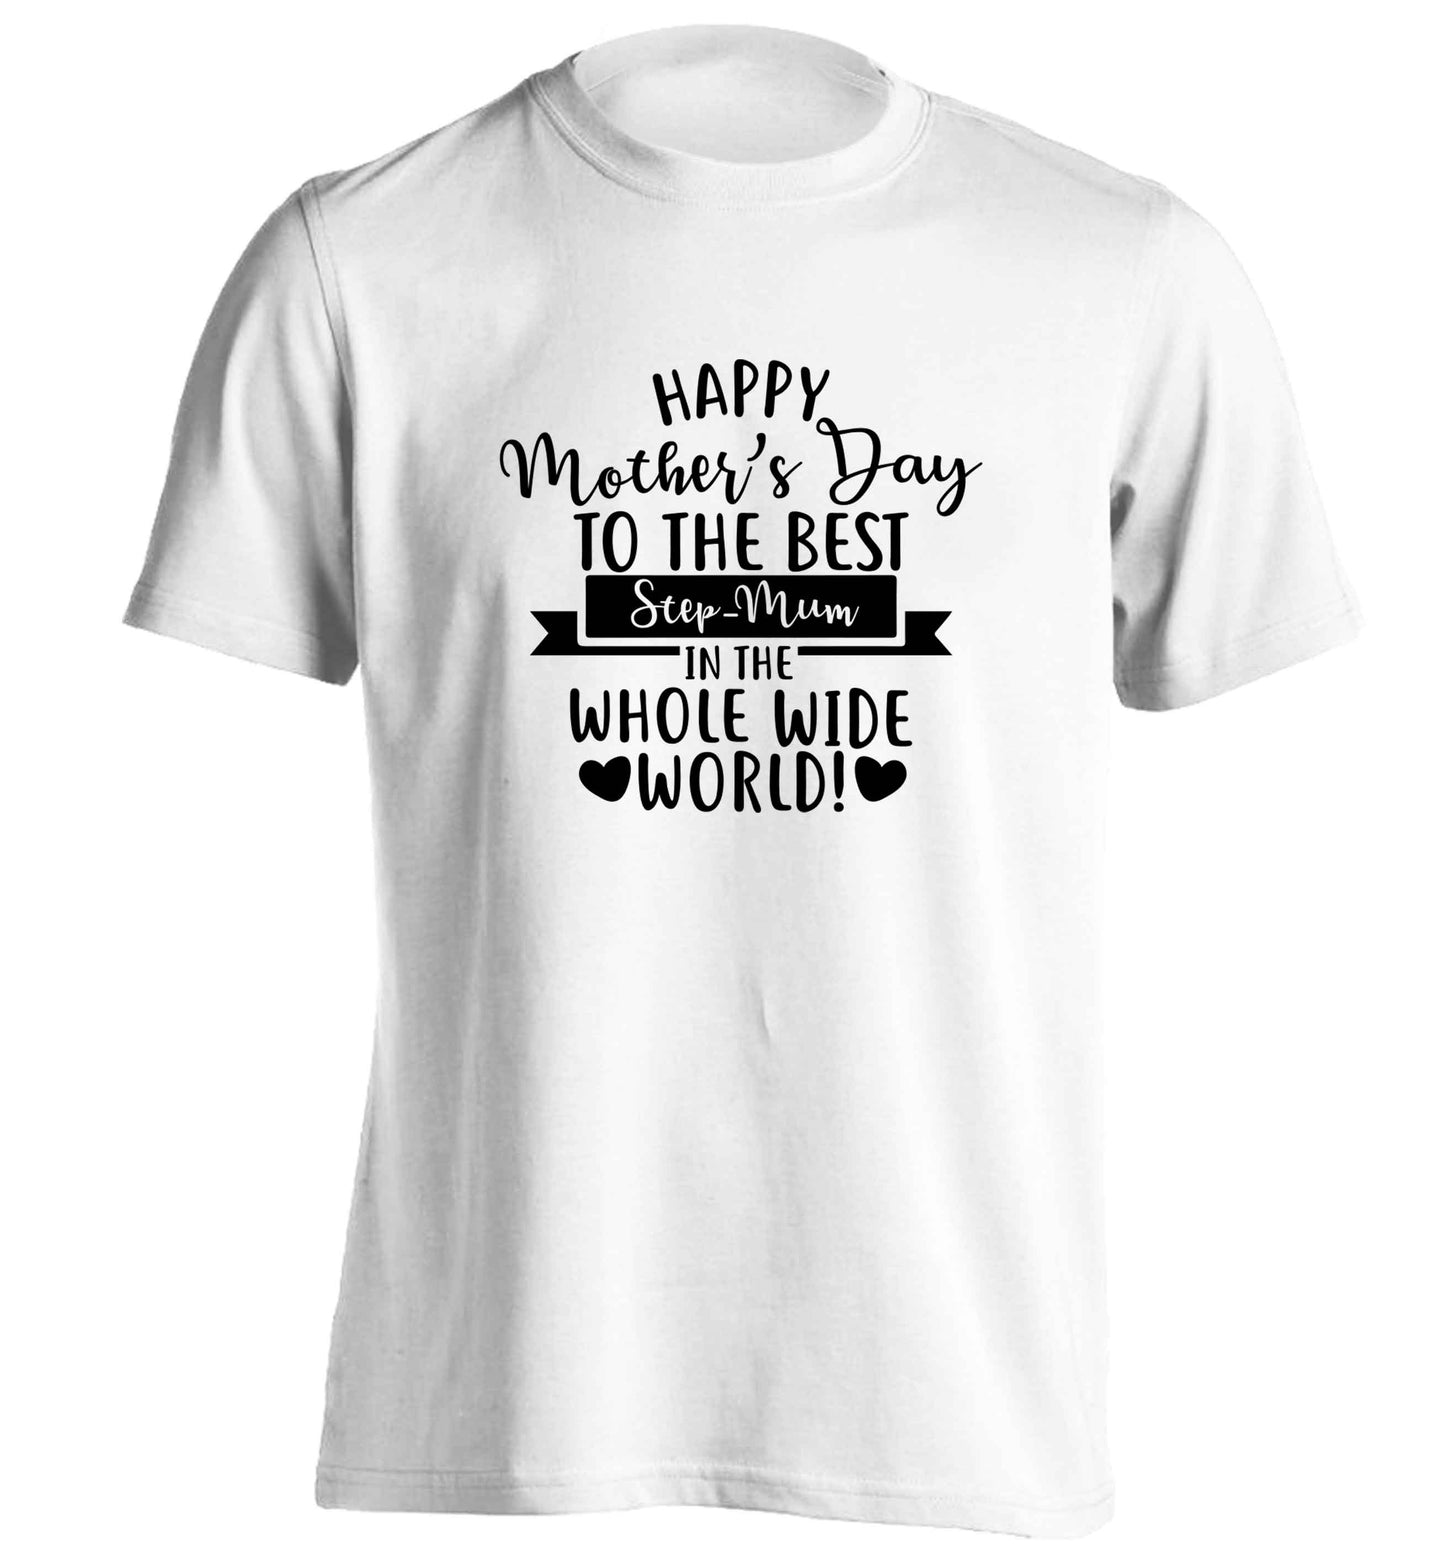 Happy mother's day to the best step-mum in the world adults unisex white Tshirt 2XL